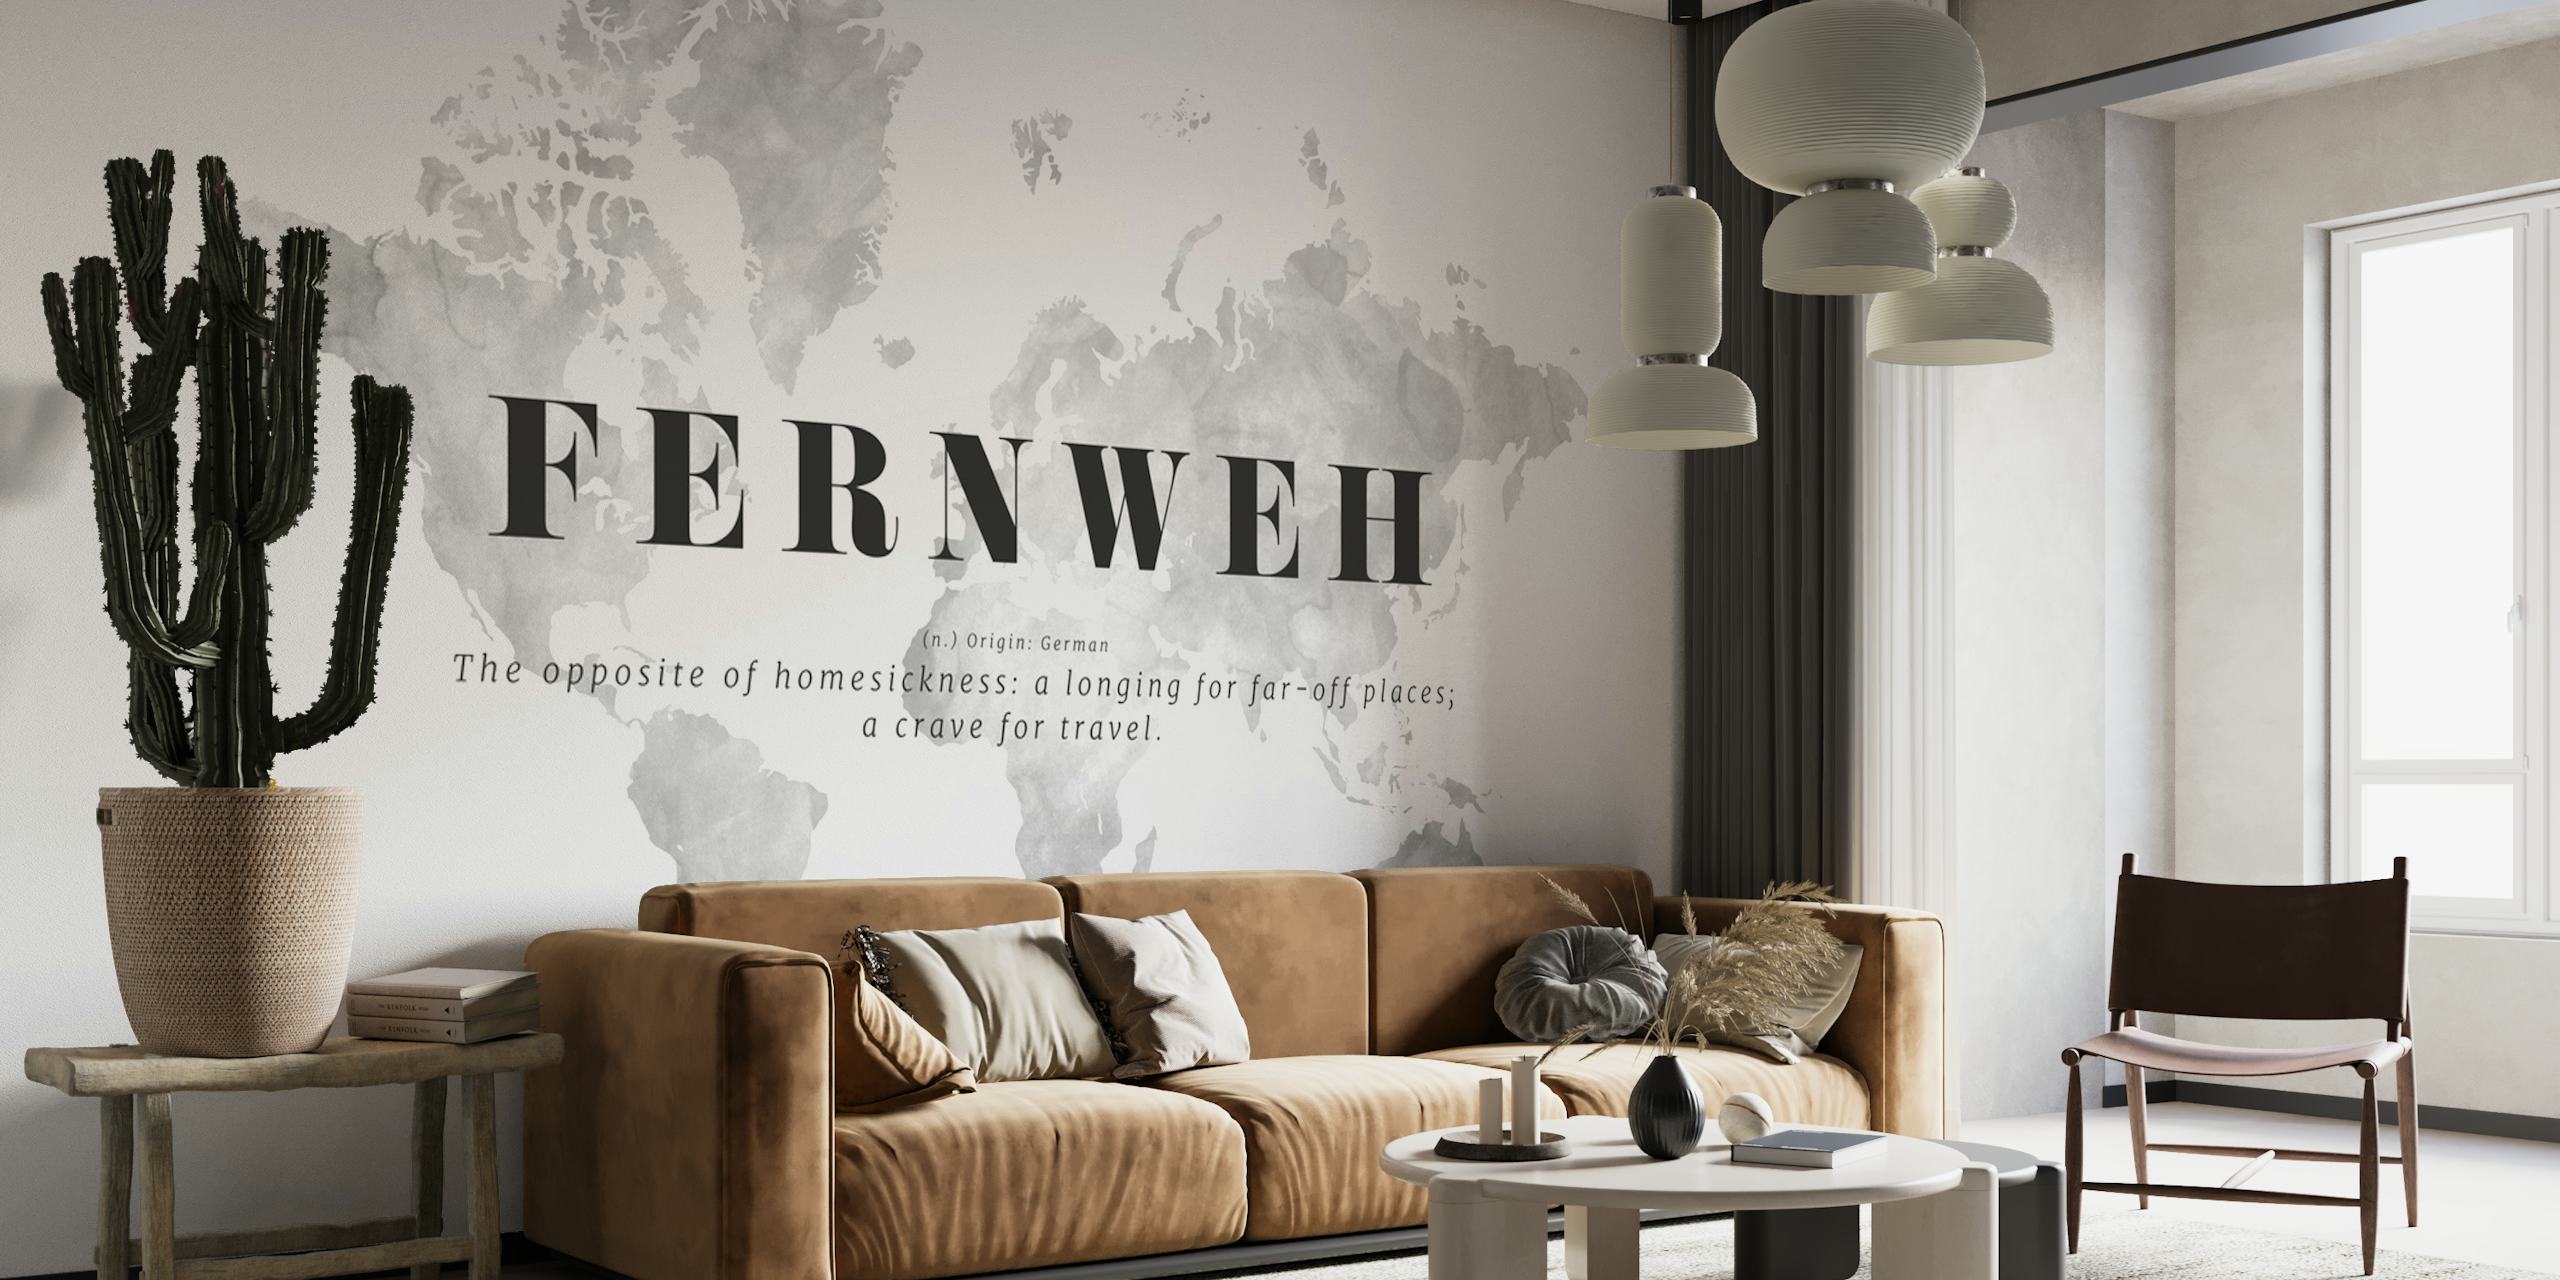 A crave for travel world map behang